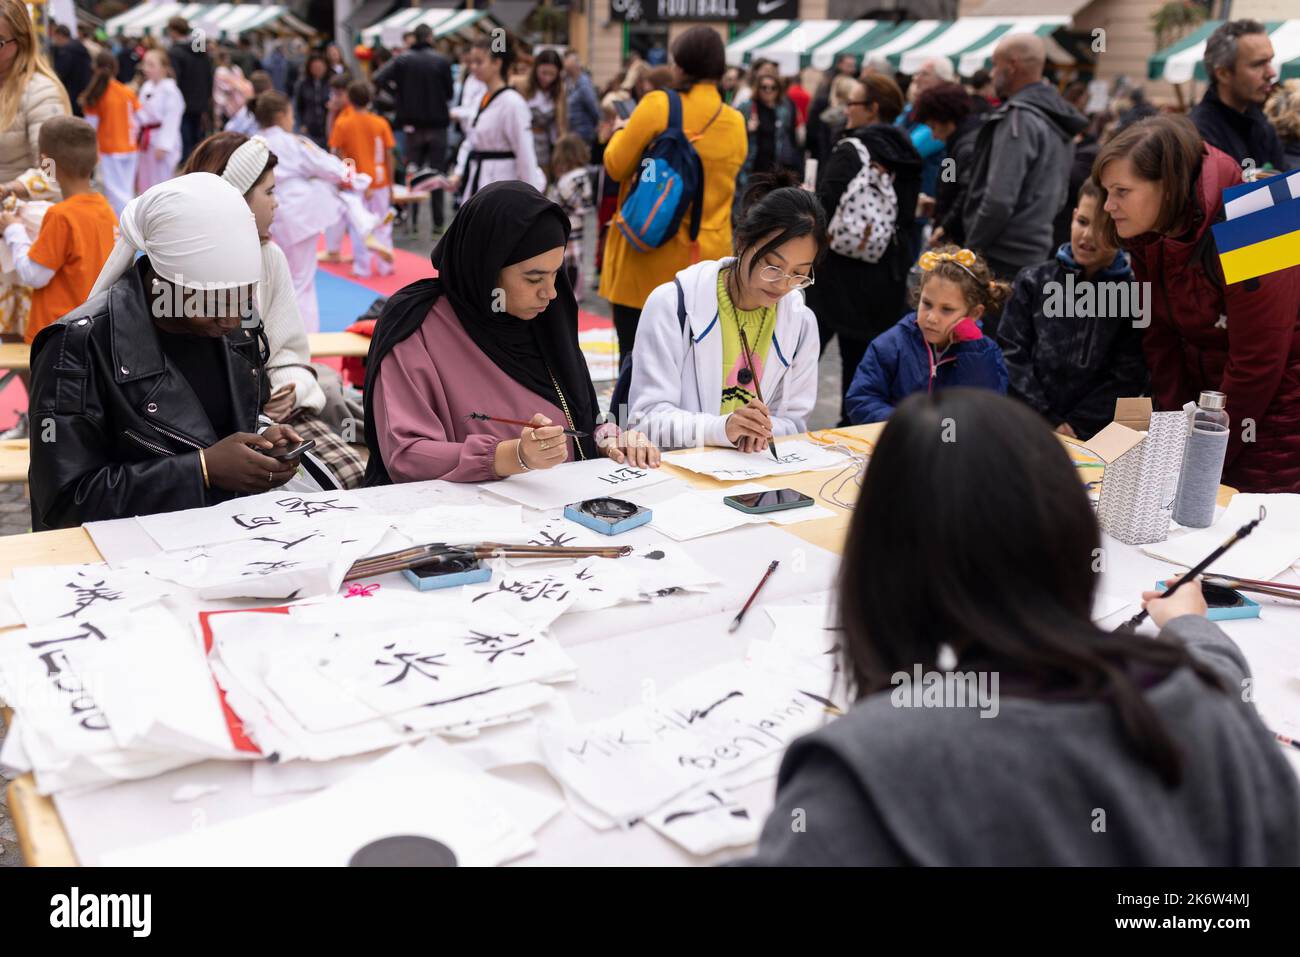 Ljubljana, Slovenia. 15th Oct, 2022. A teacher from the Confucius Institute in Ljubljana (3rd L) showcases Chinese calligraphy at a charity event in Ljubljana, Slovenia, Oct. 15, 2022. The Confucius Institute in Ljubljana on Saturday showcased Chinese culture at a charity event held in the capital of Slovenia. Visitors had the chance to taste Chinese tea, experience Chinese calligraphy, and put on Hanfu, traditional Chinese clothing, to take photos at the event, which aims at raising fund for Slovenian children in need. Credit: Zeljko Stevanic/Xinhua/Alamy Live News Stock Photo